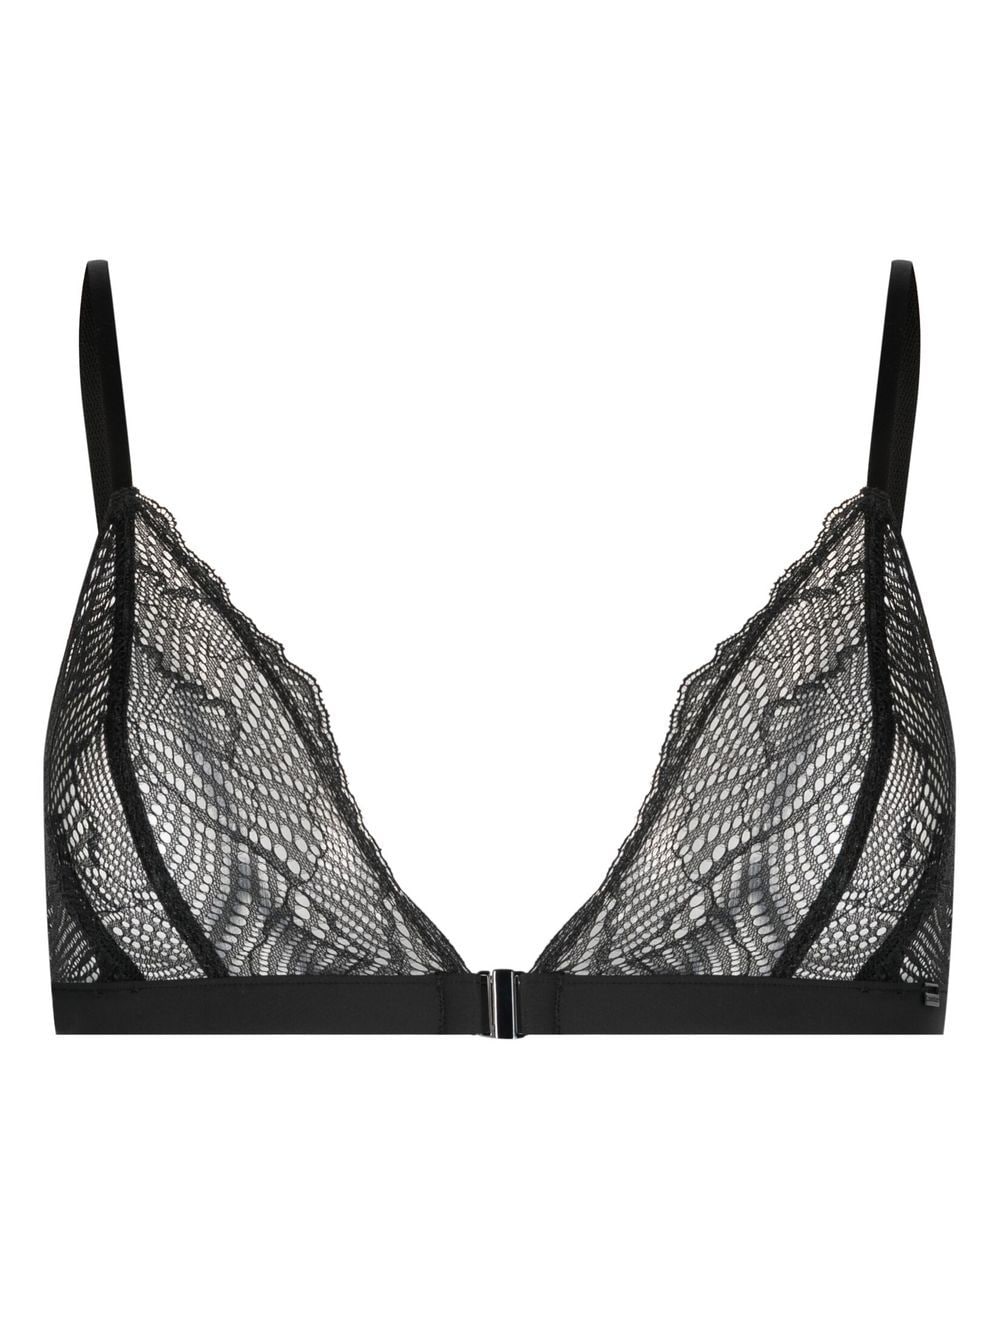 Lace Moulded Triangle Bra Calvin Klein®